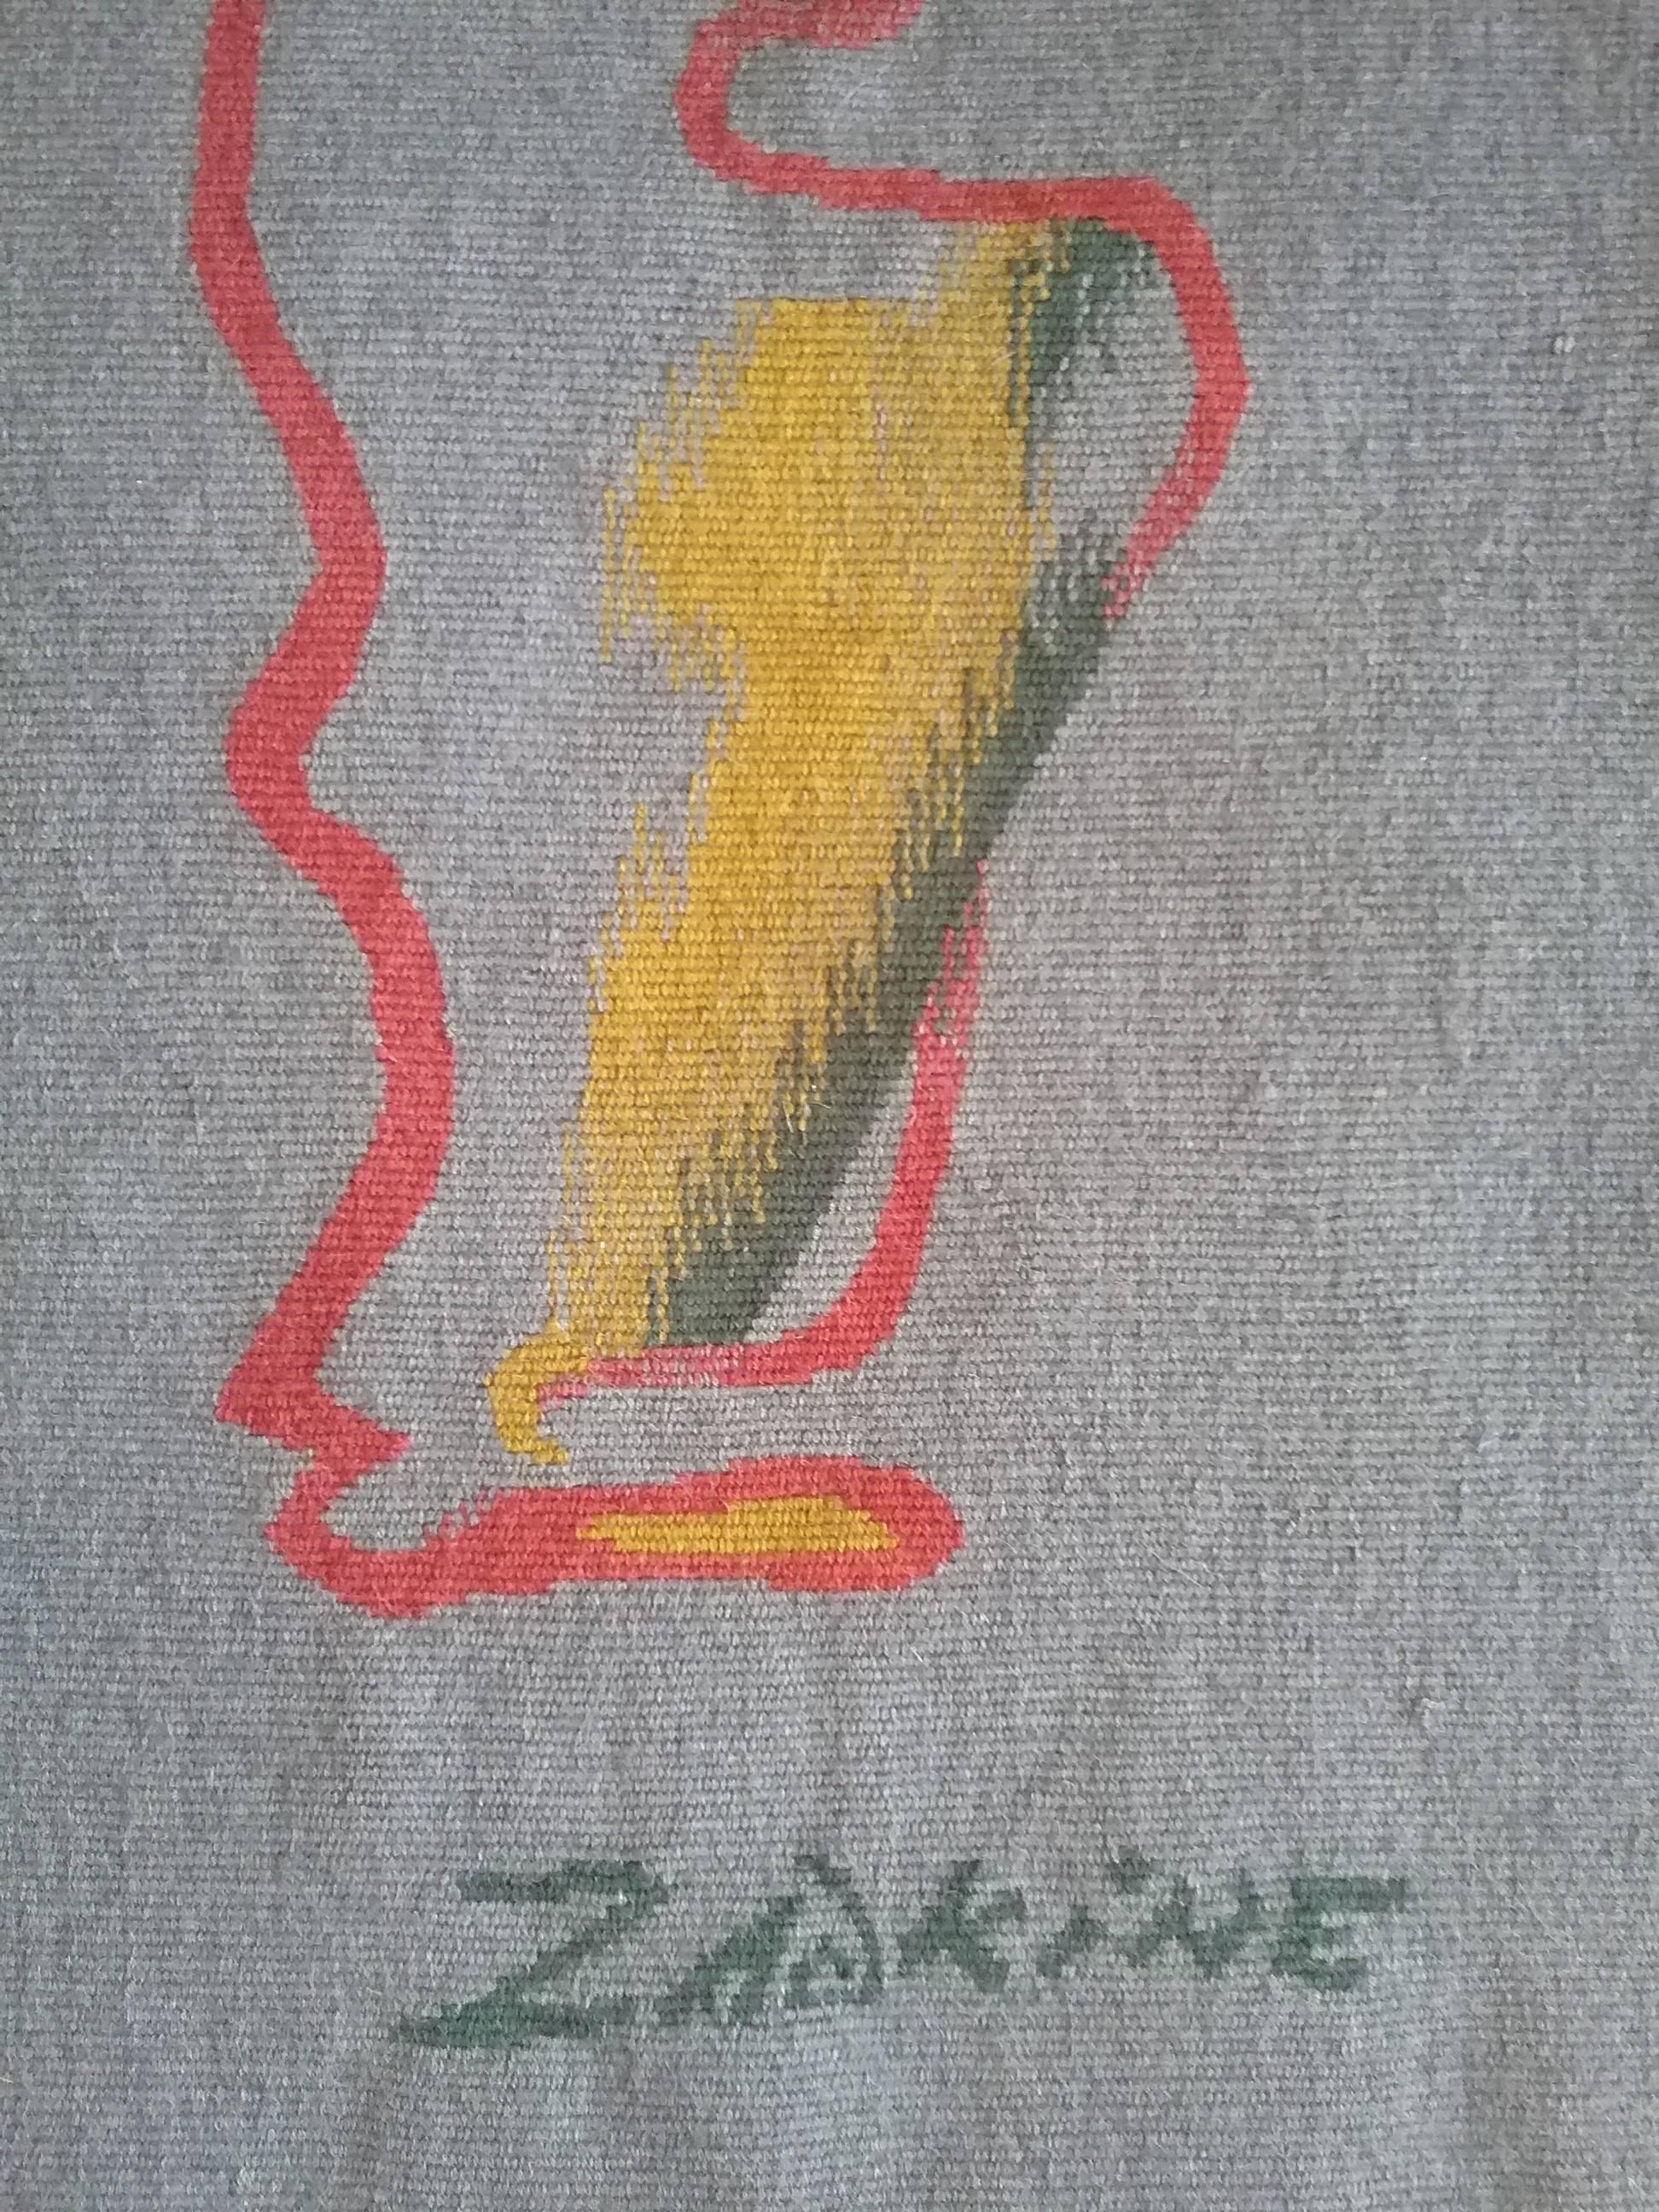 Exceptional Ossip Zadkine Aubusson Tapestry, 1963, Raymond Picaud Workshop In Good Condition For Sale In Aix En Provence, FR